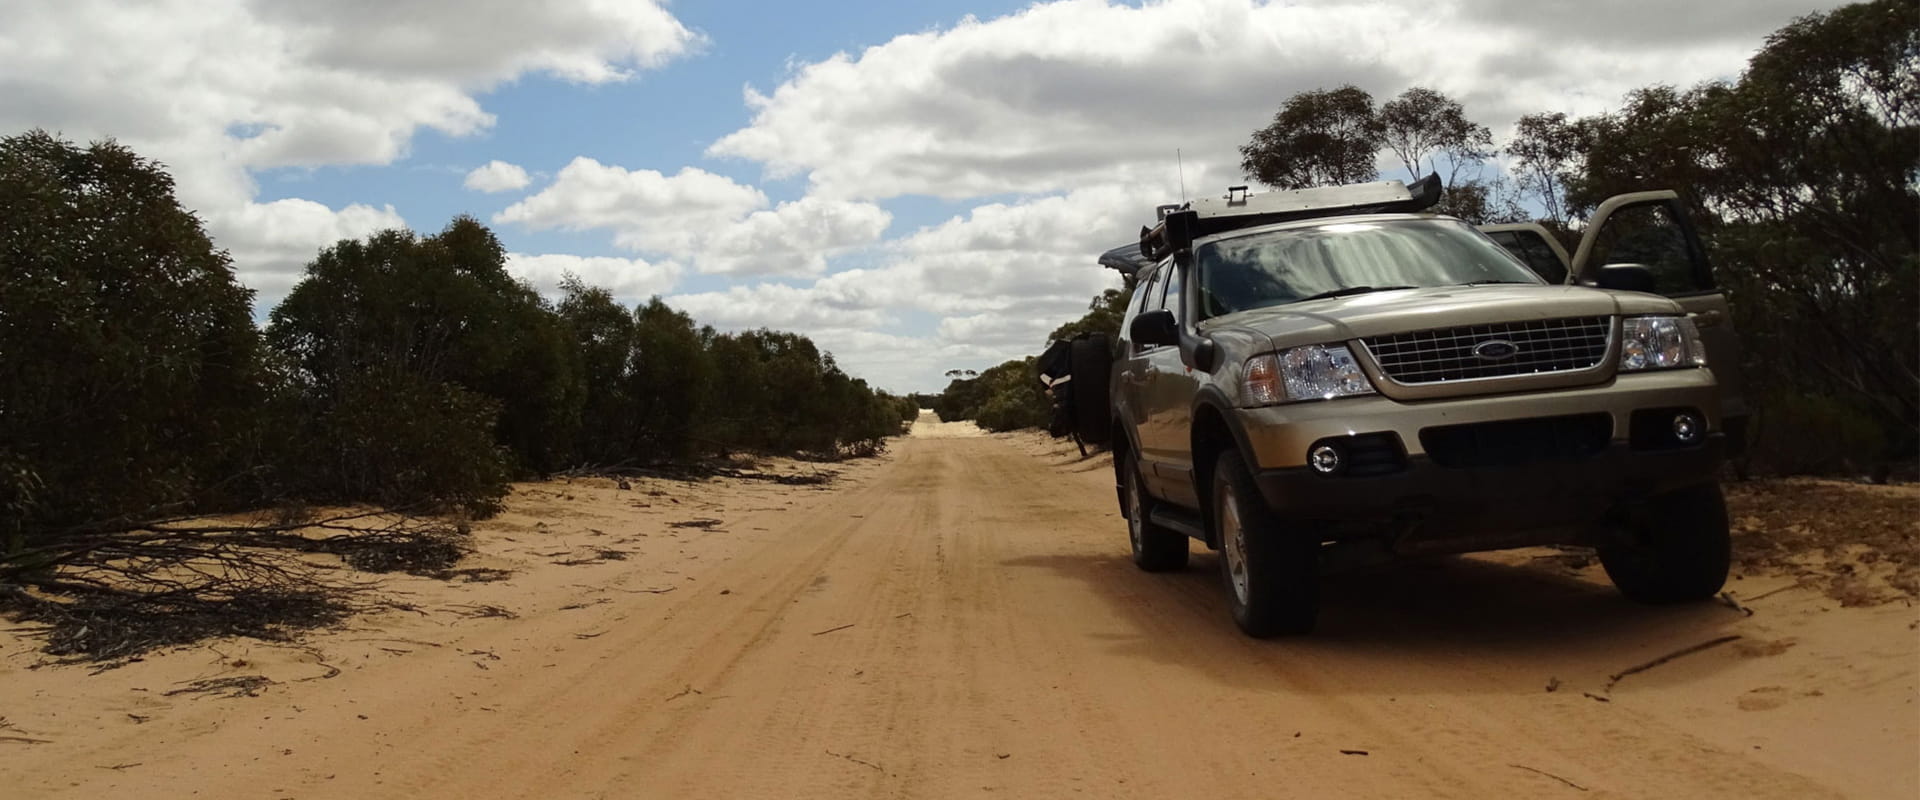 A four wheel drive is parked along a long sandy track in a shrubby rugged bushland